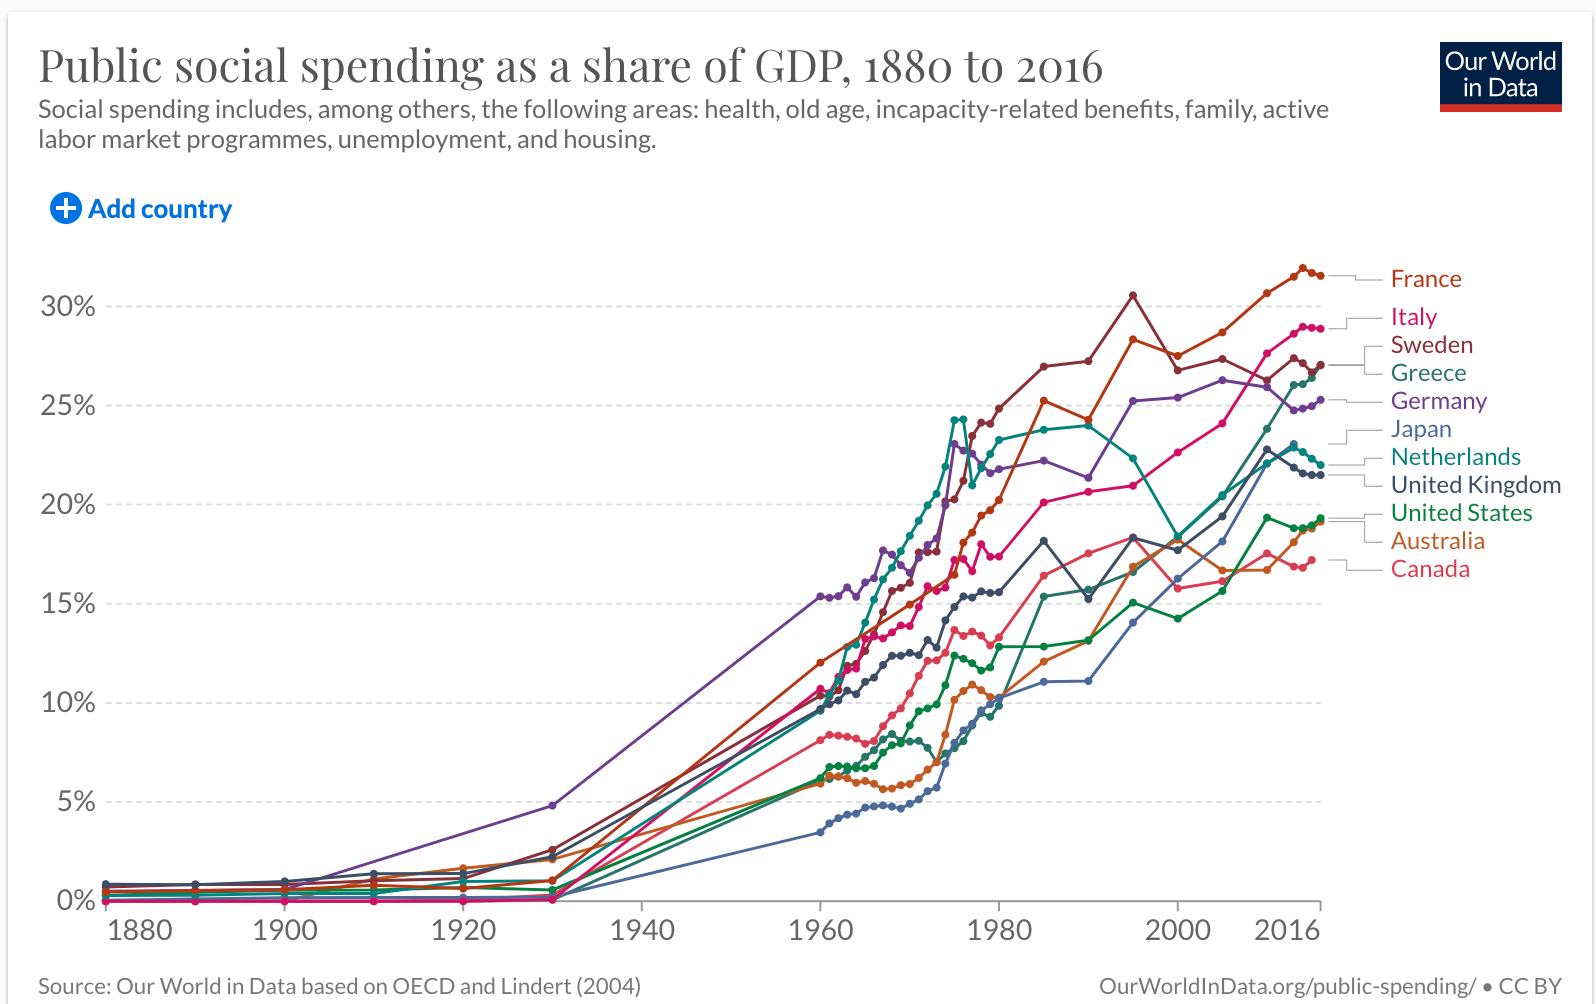 Public social spending as a share of GDP